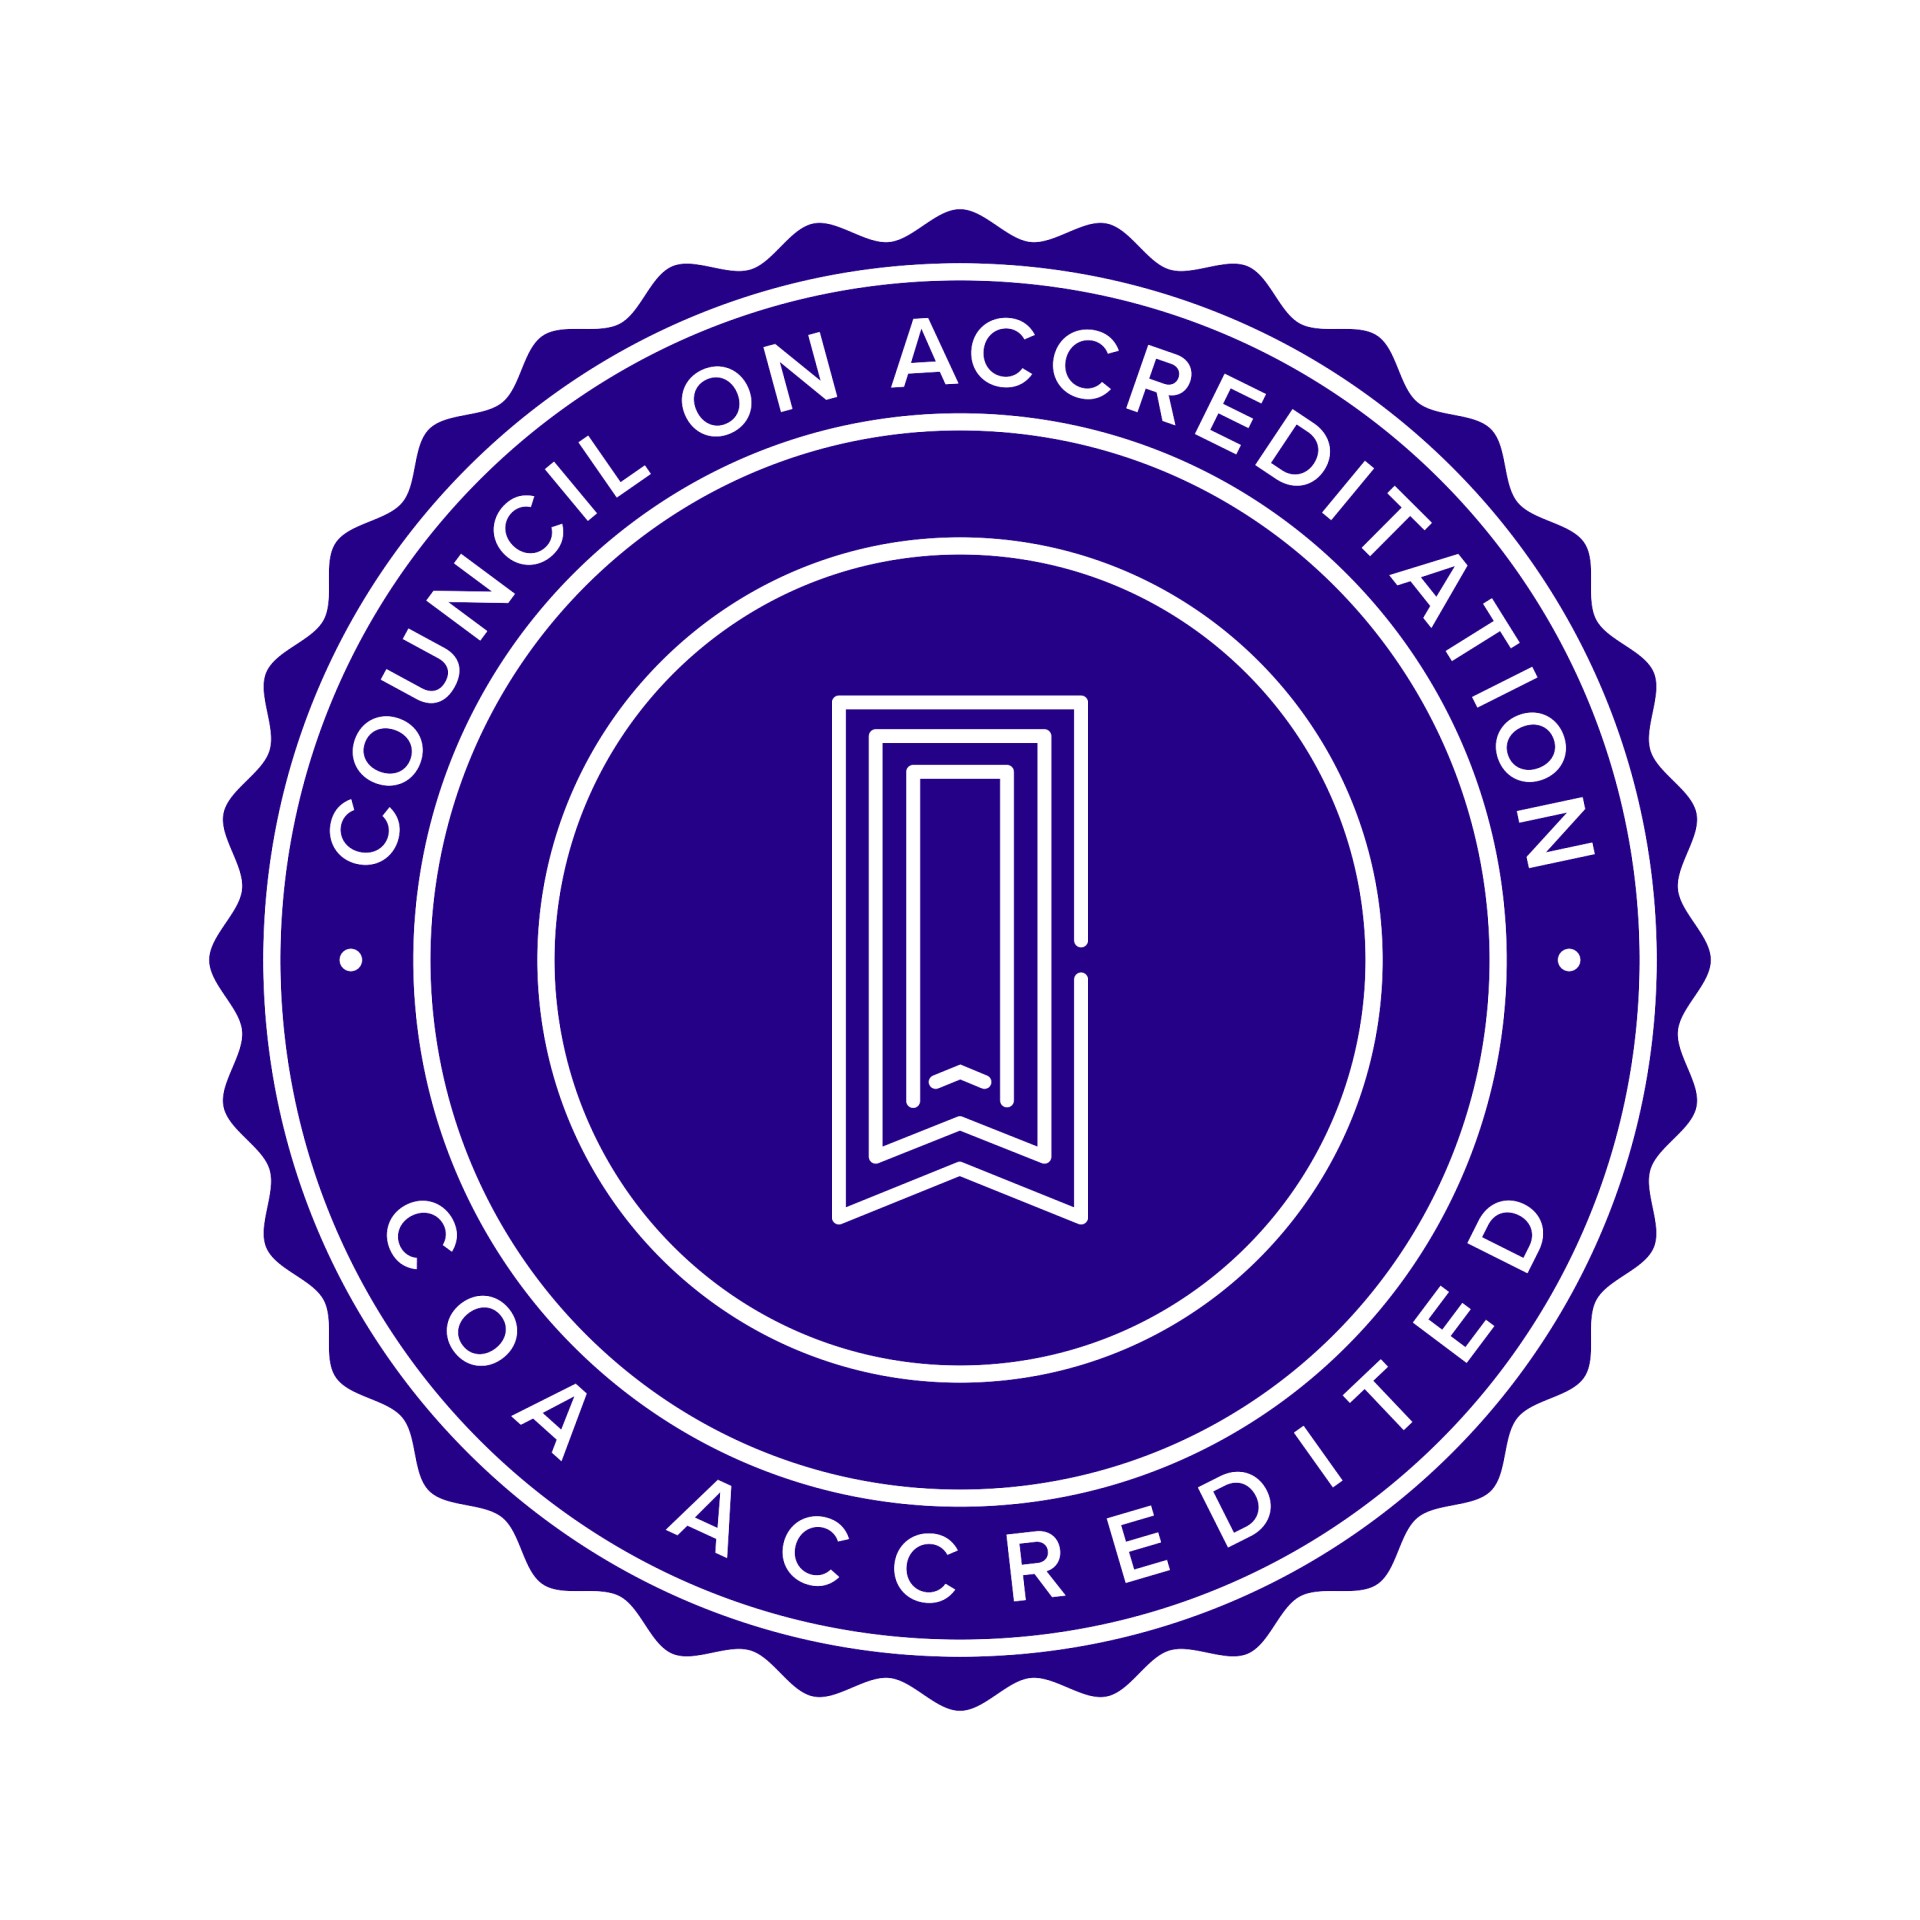 Council on Accreditation accredited seal